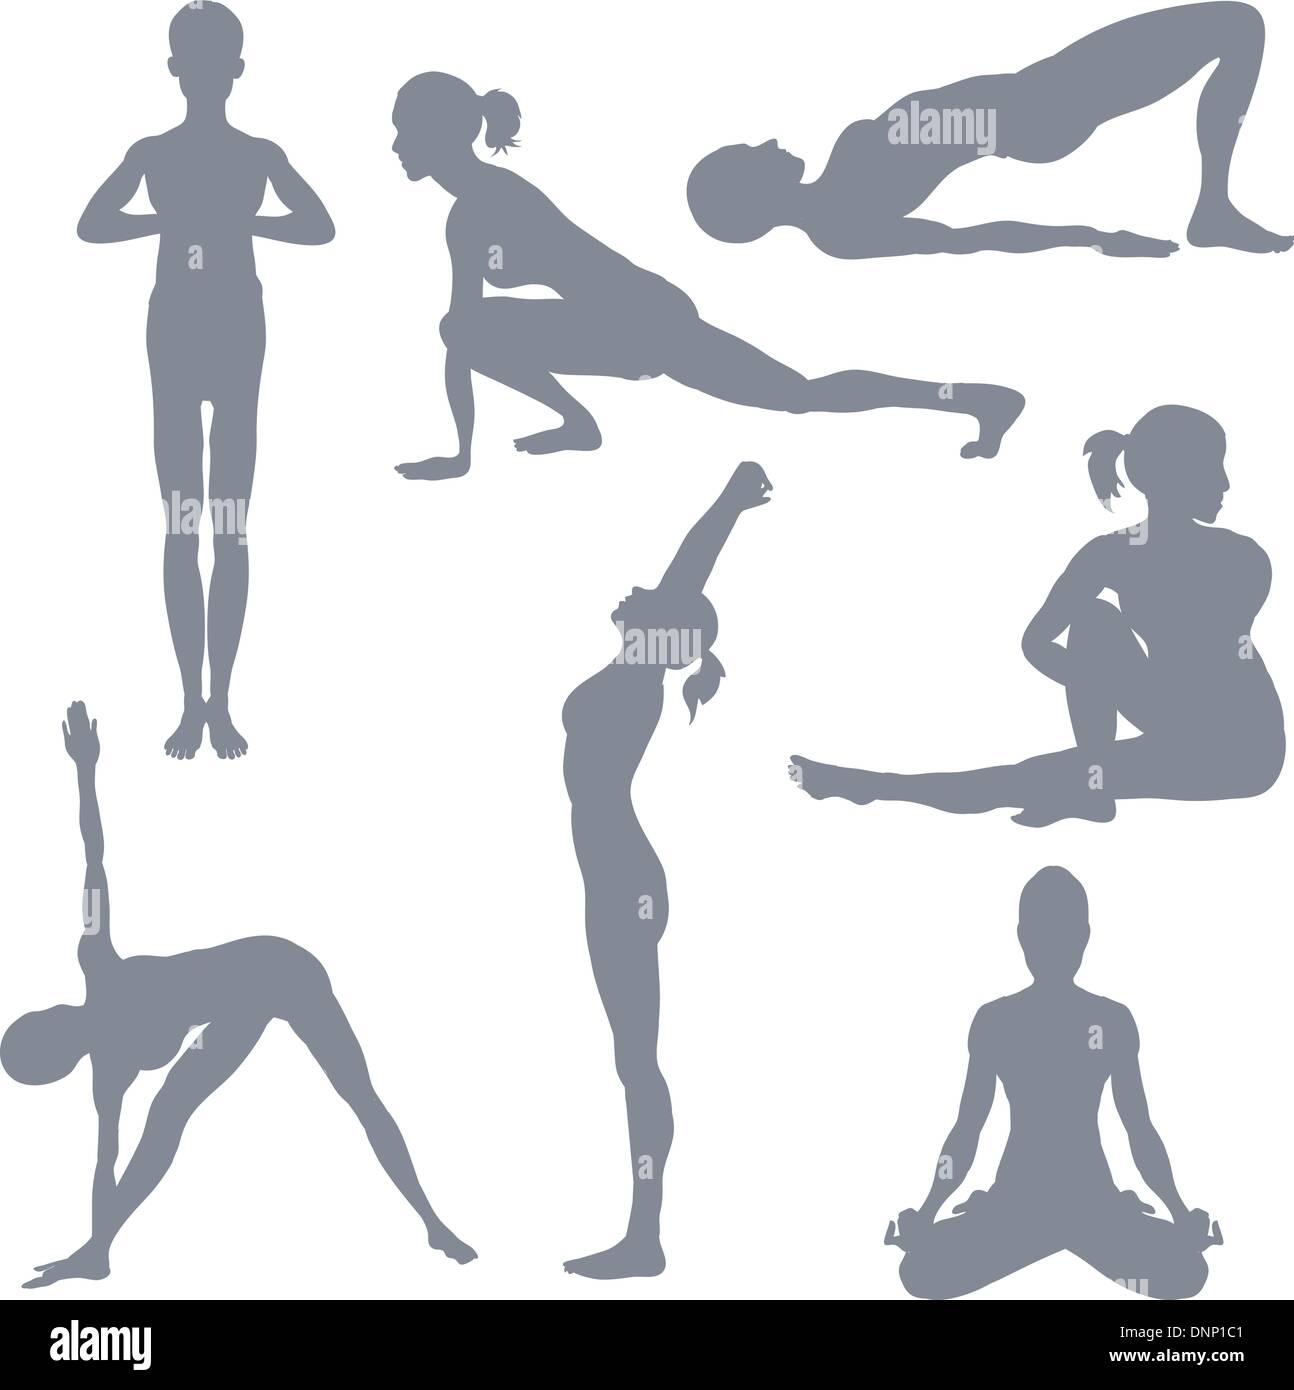 Yoga postures. A set of yoga postures silhouettes. Stock Vector